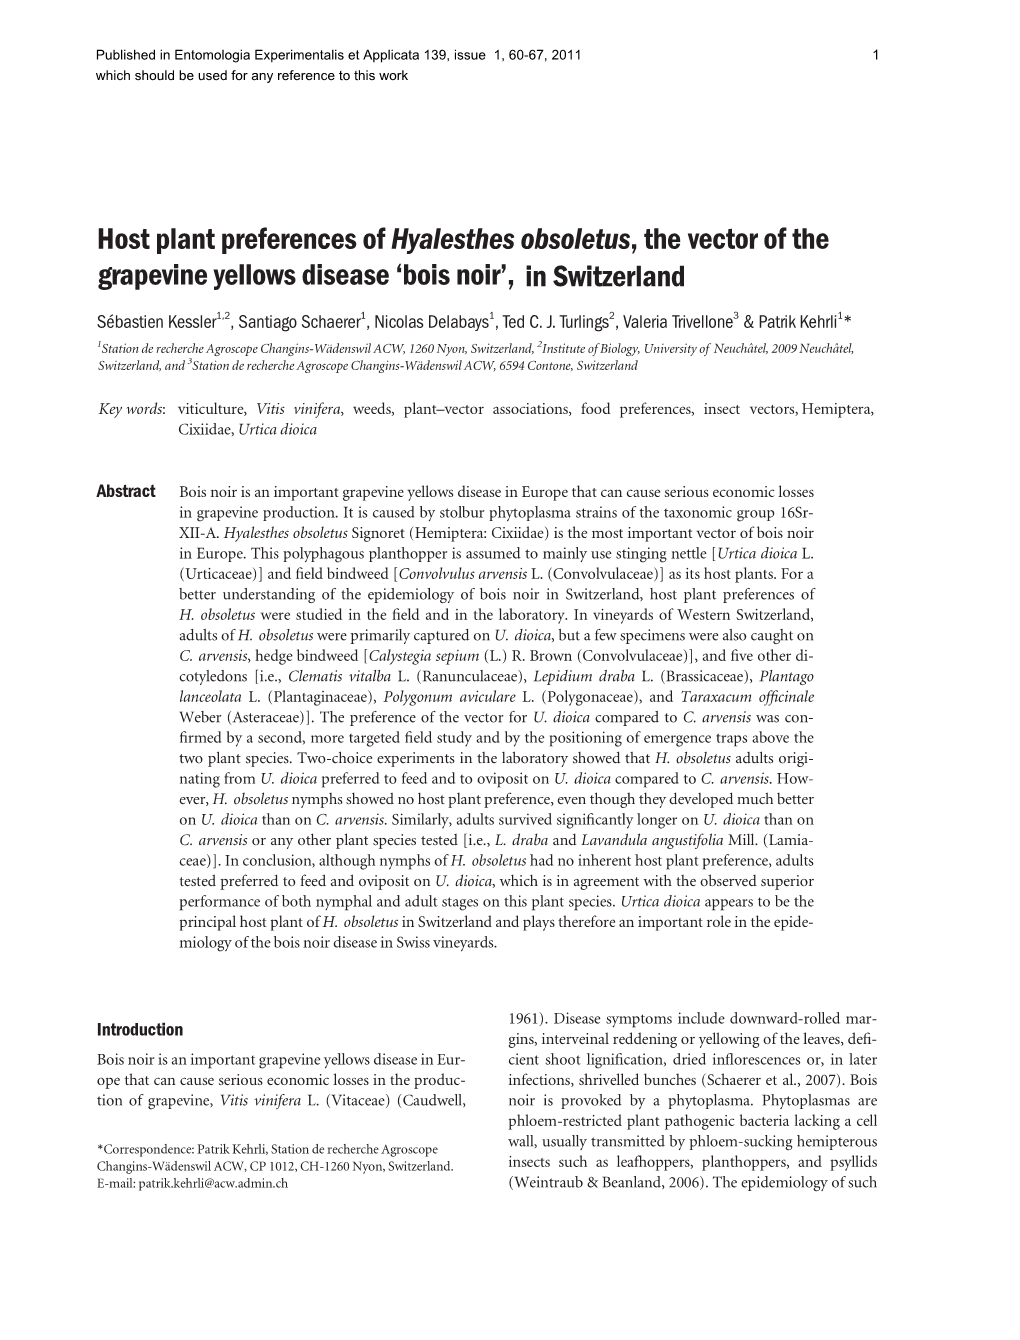 Host Plant Preferences of Hyalesthes Obsoletus, the Vector of The